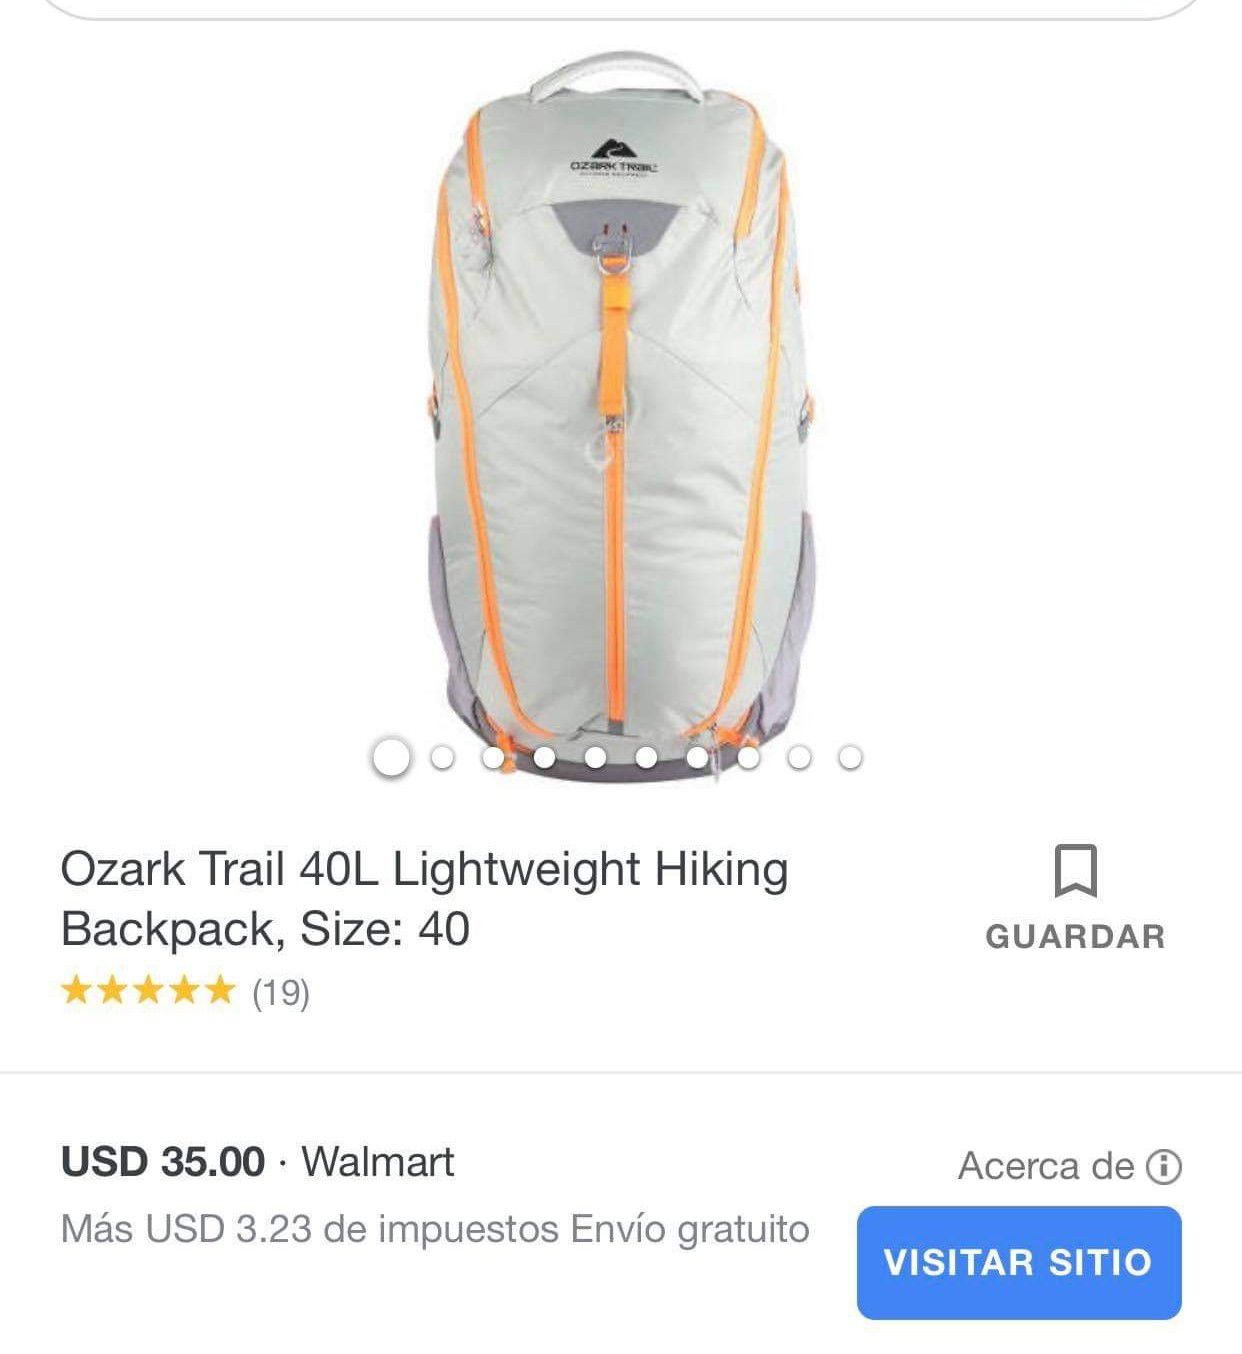 Hiking backpack retail price on picture